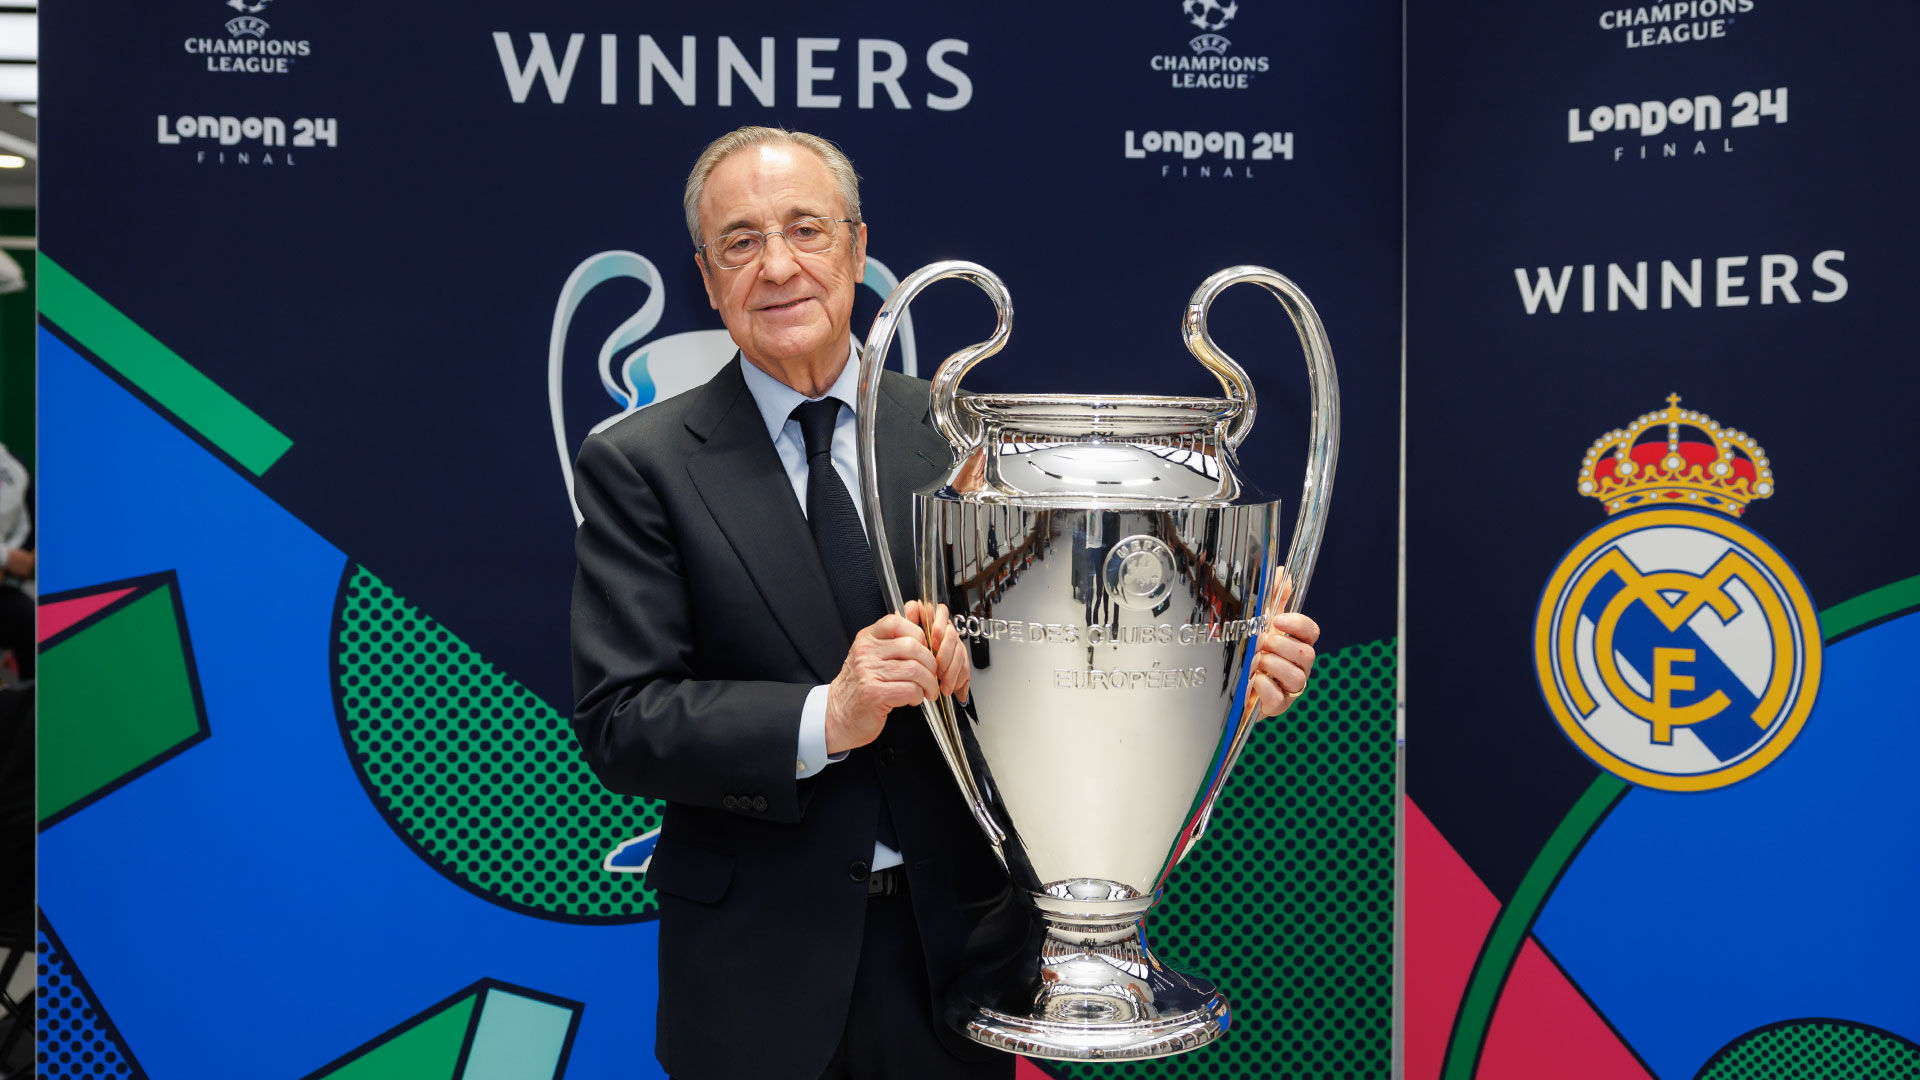 Florentino Pérez: "This is a love story between Real Madrid and the European Cup"